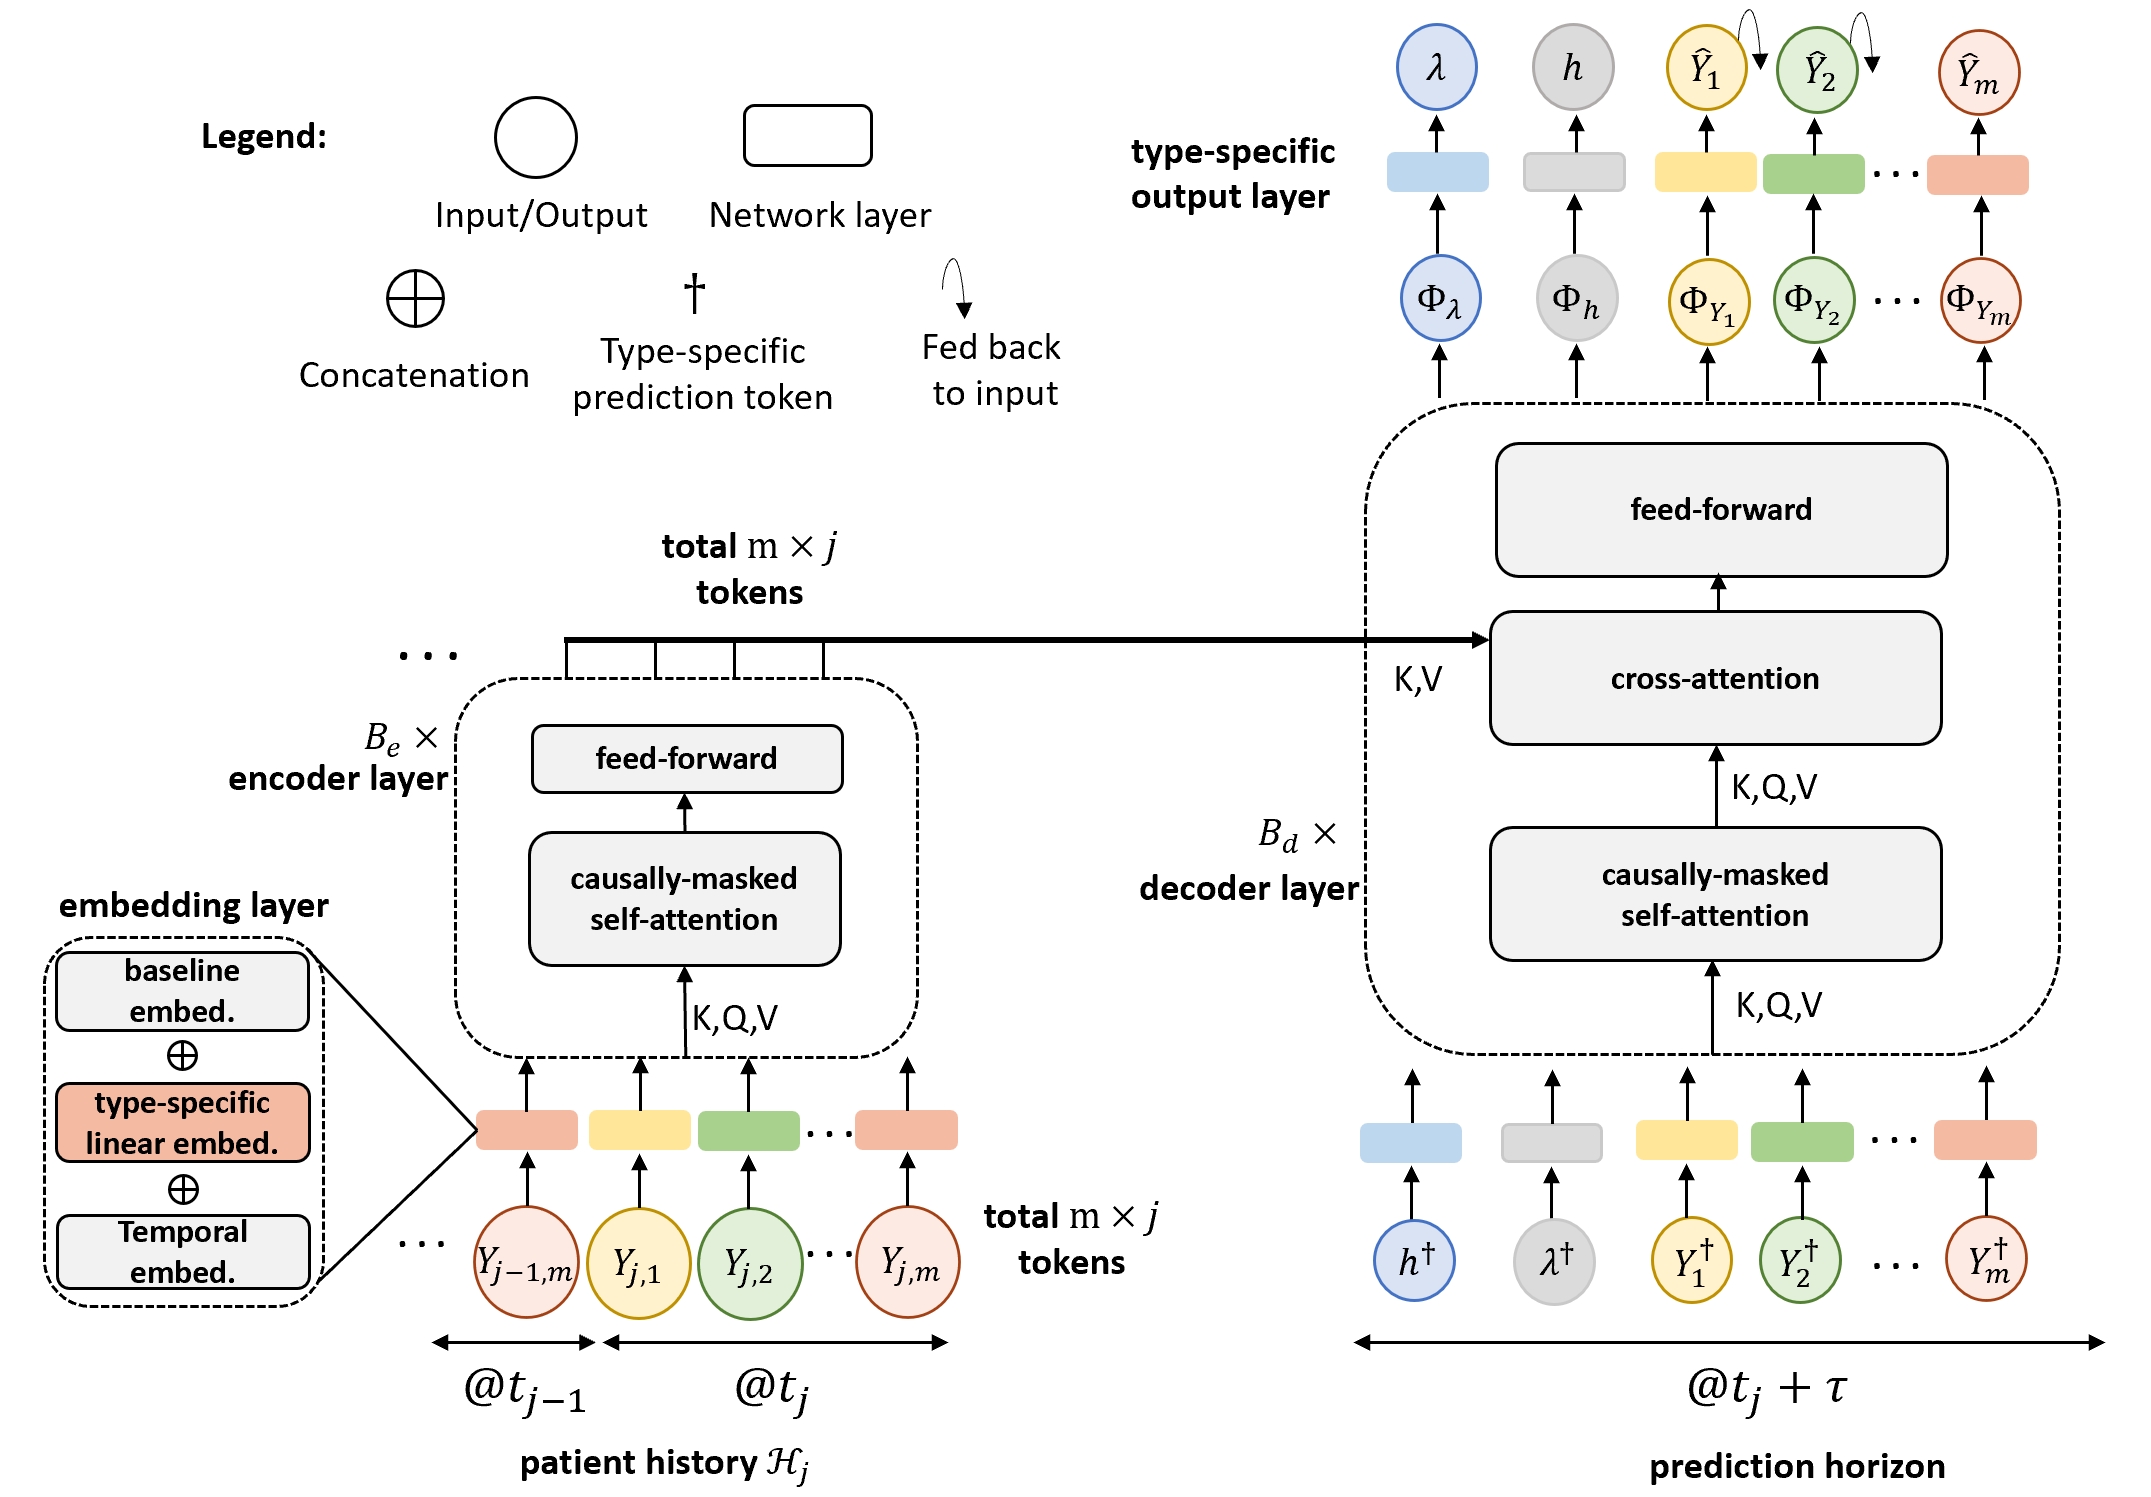 TransformerLSR: Attentive Joint Model of Longitudinal Data, Survival, and Recurrent Events with Concurrent Latent Structure